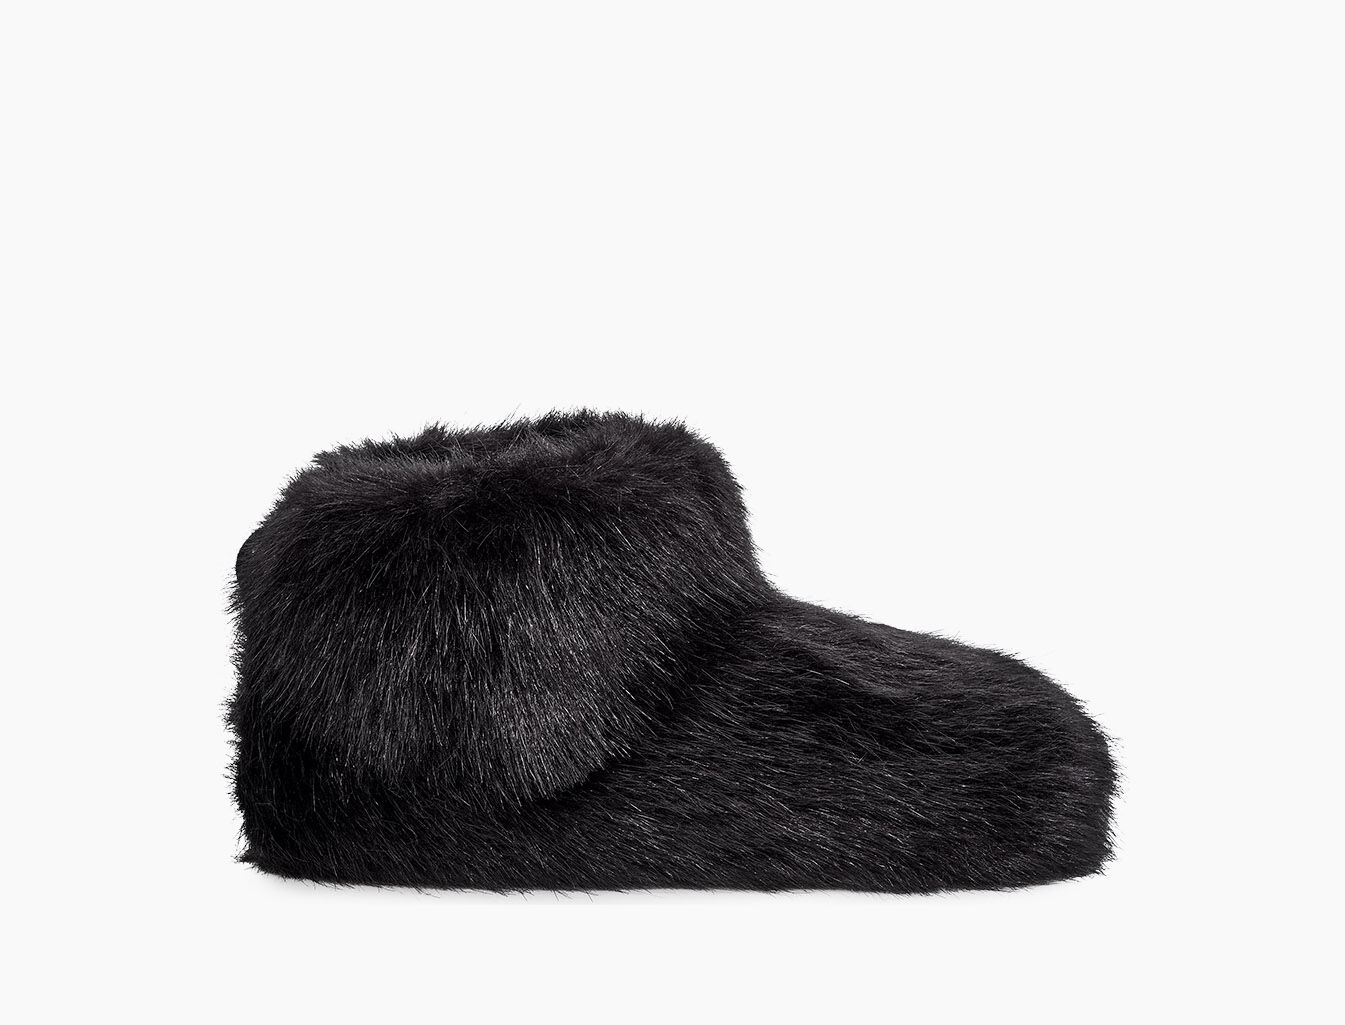 ugg faux fur slippers